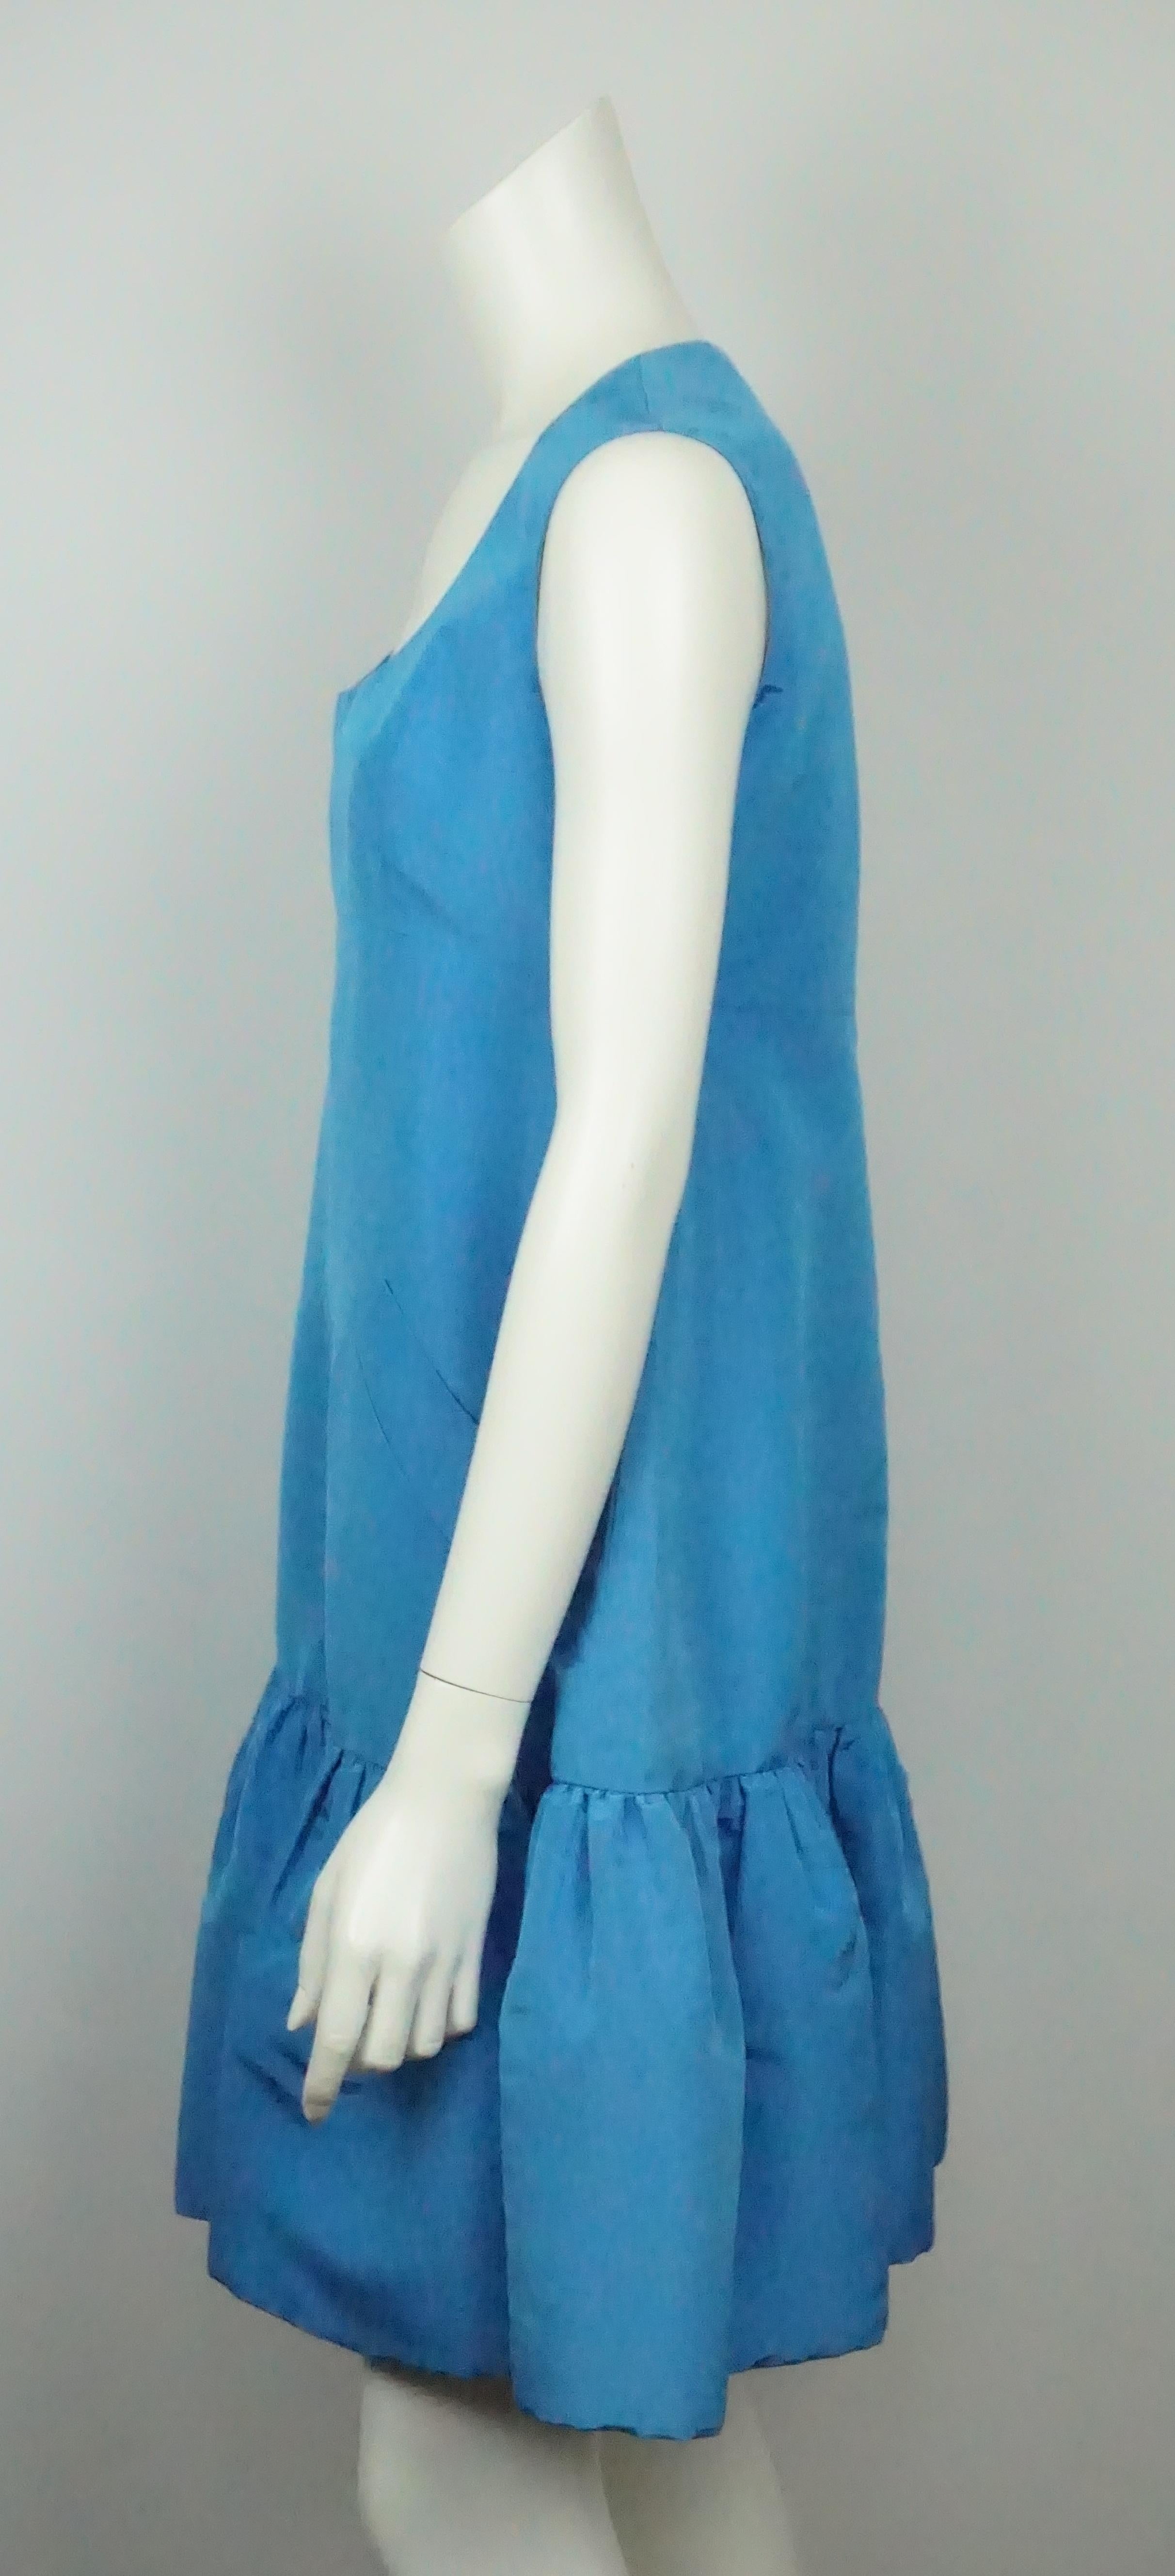 Oscar De La Renta Blue W/ Ruffle Bottom Dress - 8. This beautiful Oscar De La Renta sleeveless dress is in great condition. It has minimal signs of use. The dress is a vibrant blue color and made of taffeta. It is a shift dress type fit, very loose